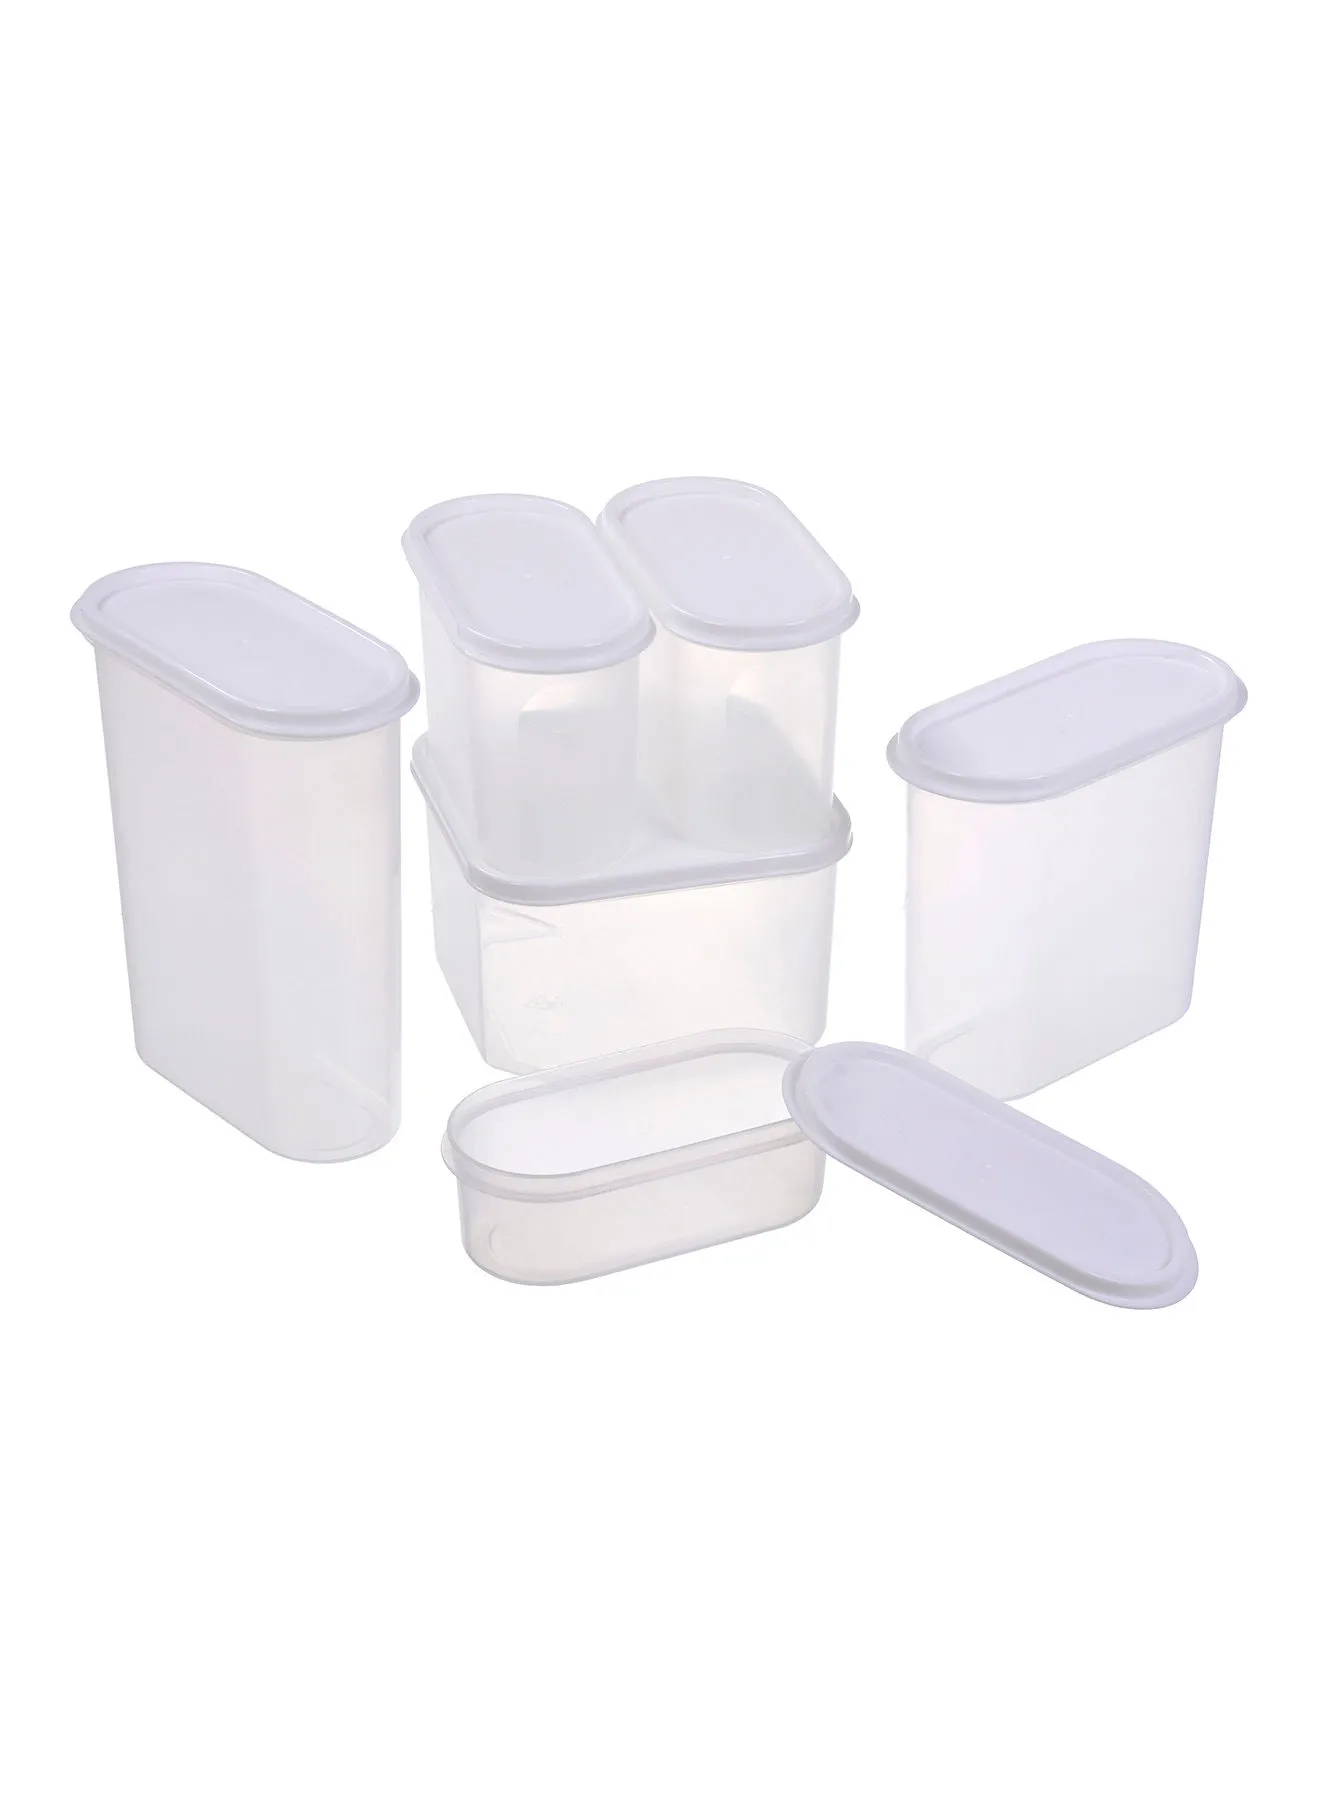 Amal 6 Piece Food Storage Container Set - Food Storage Box - Storage Boxes - Kitchen Cabinet Organizers - Food Container - Clear/White